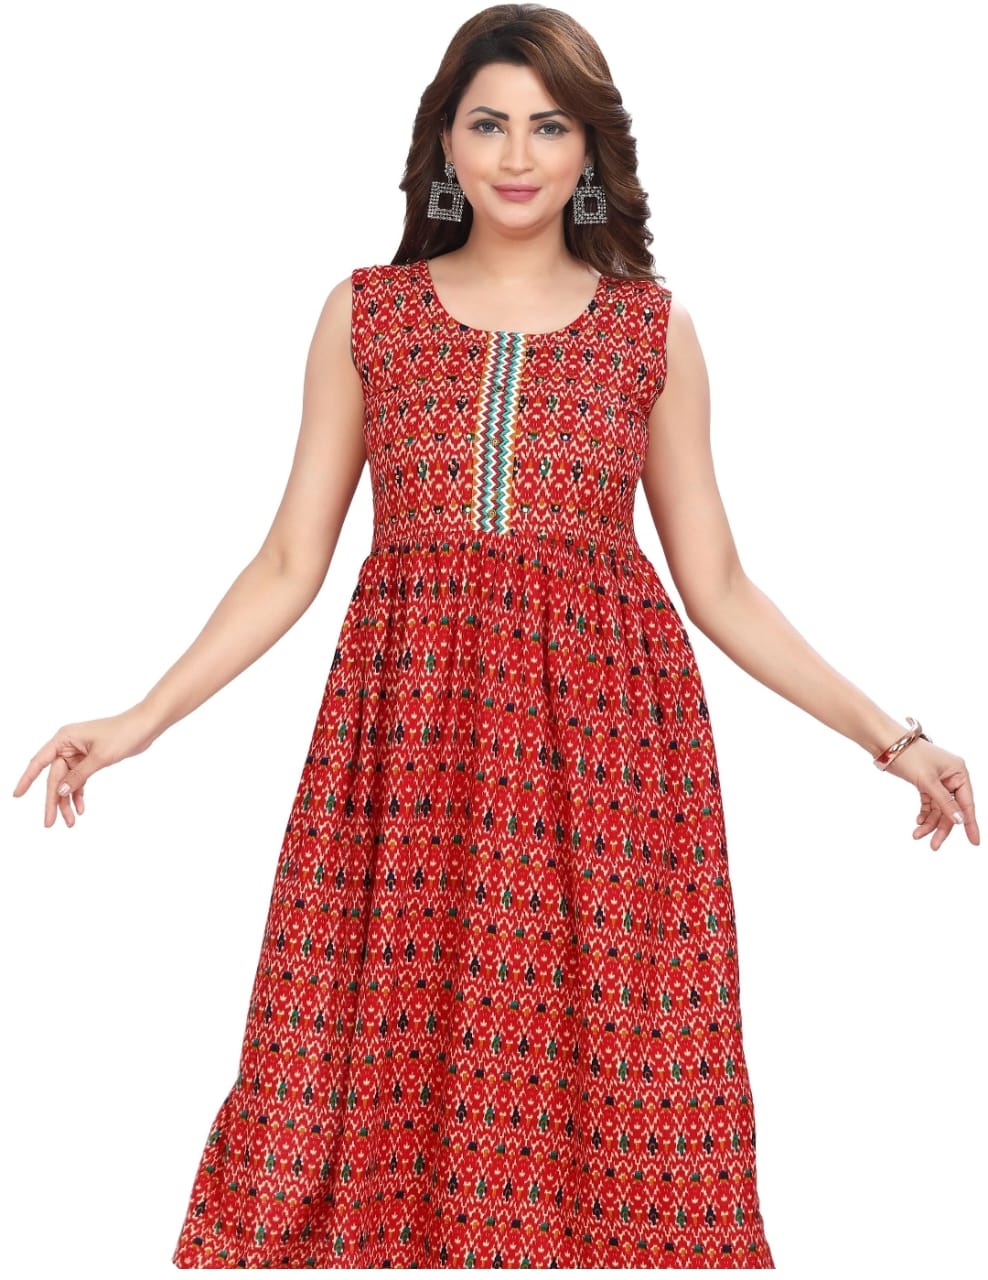 Cotton body frock with ajrakh print